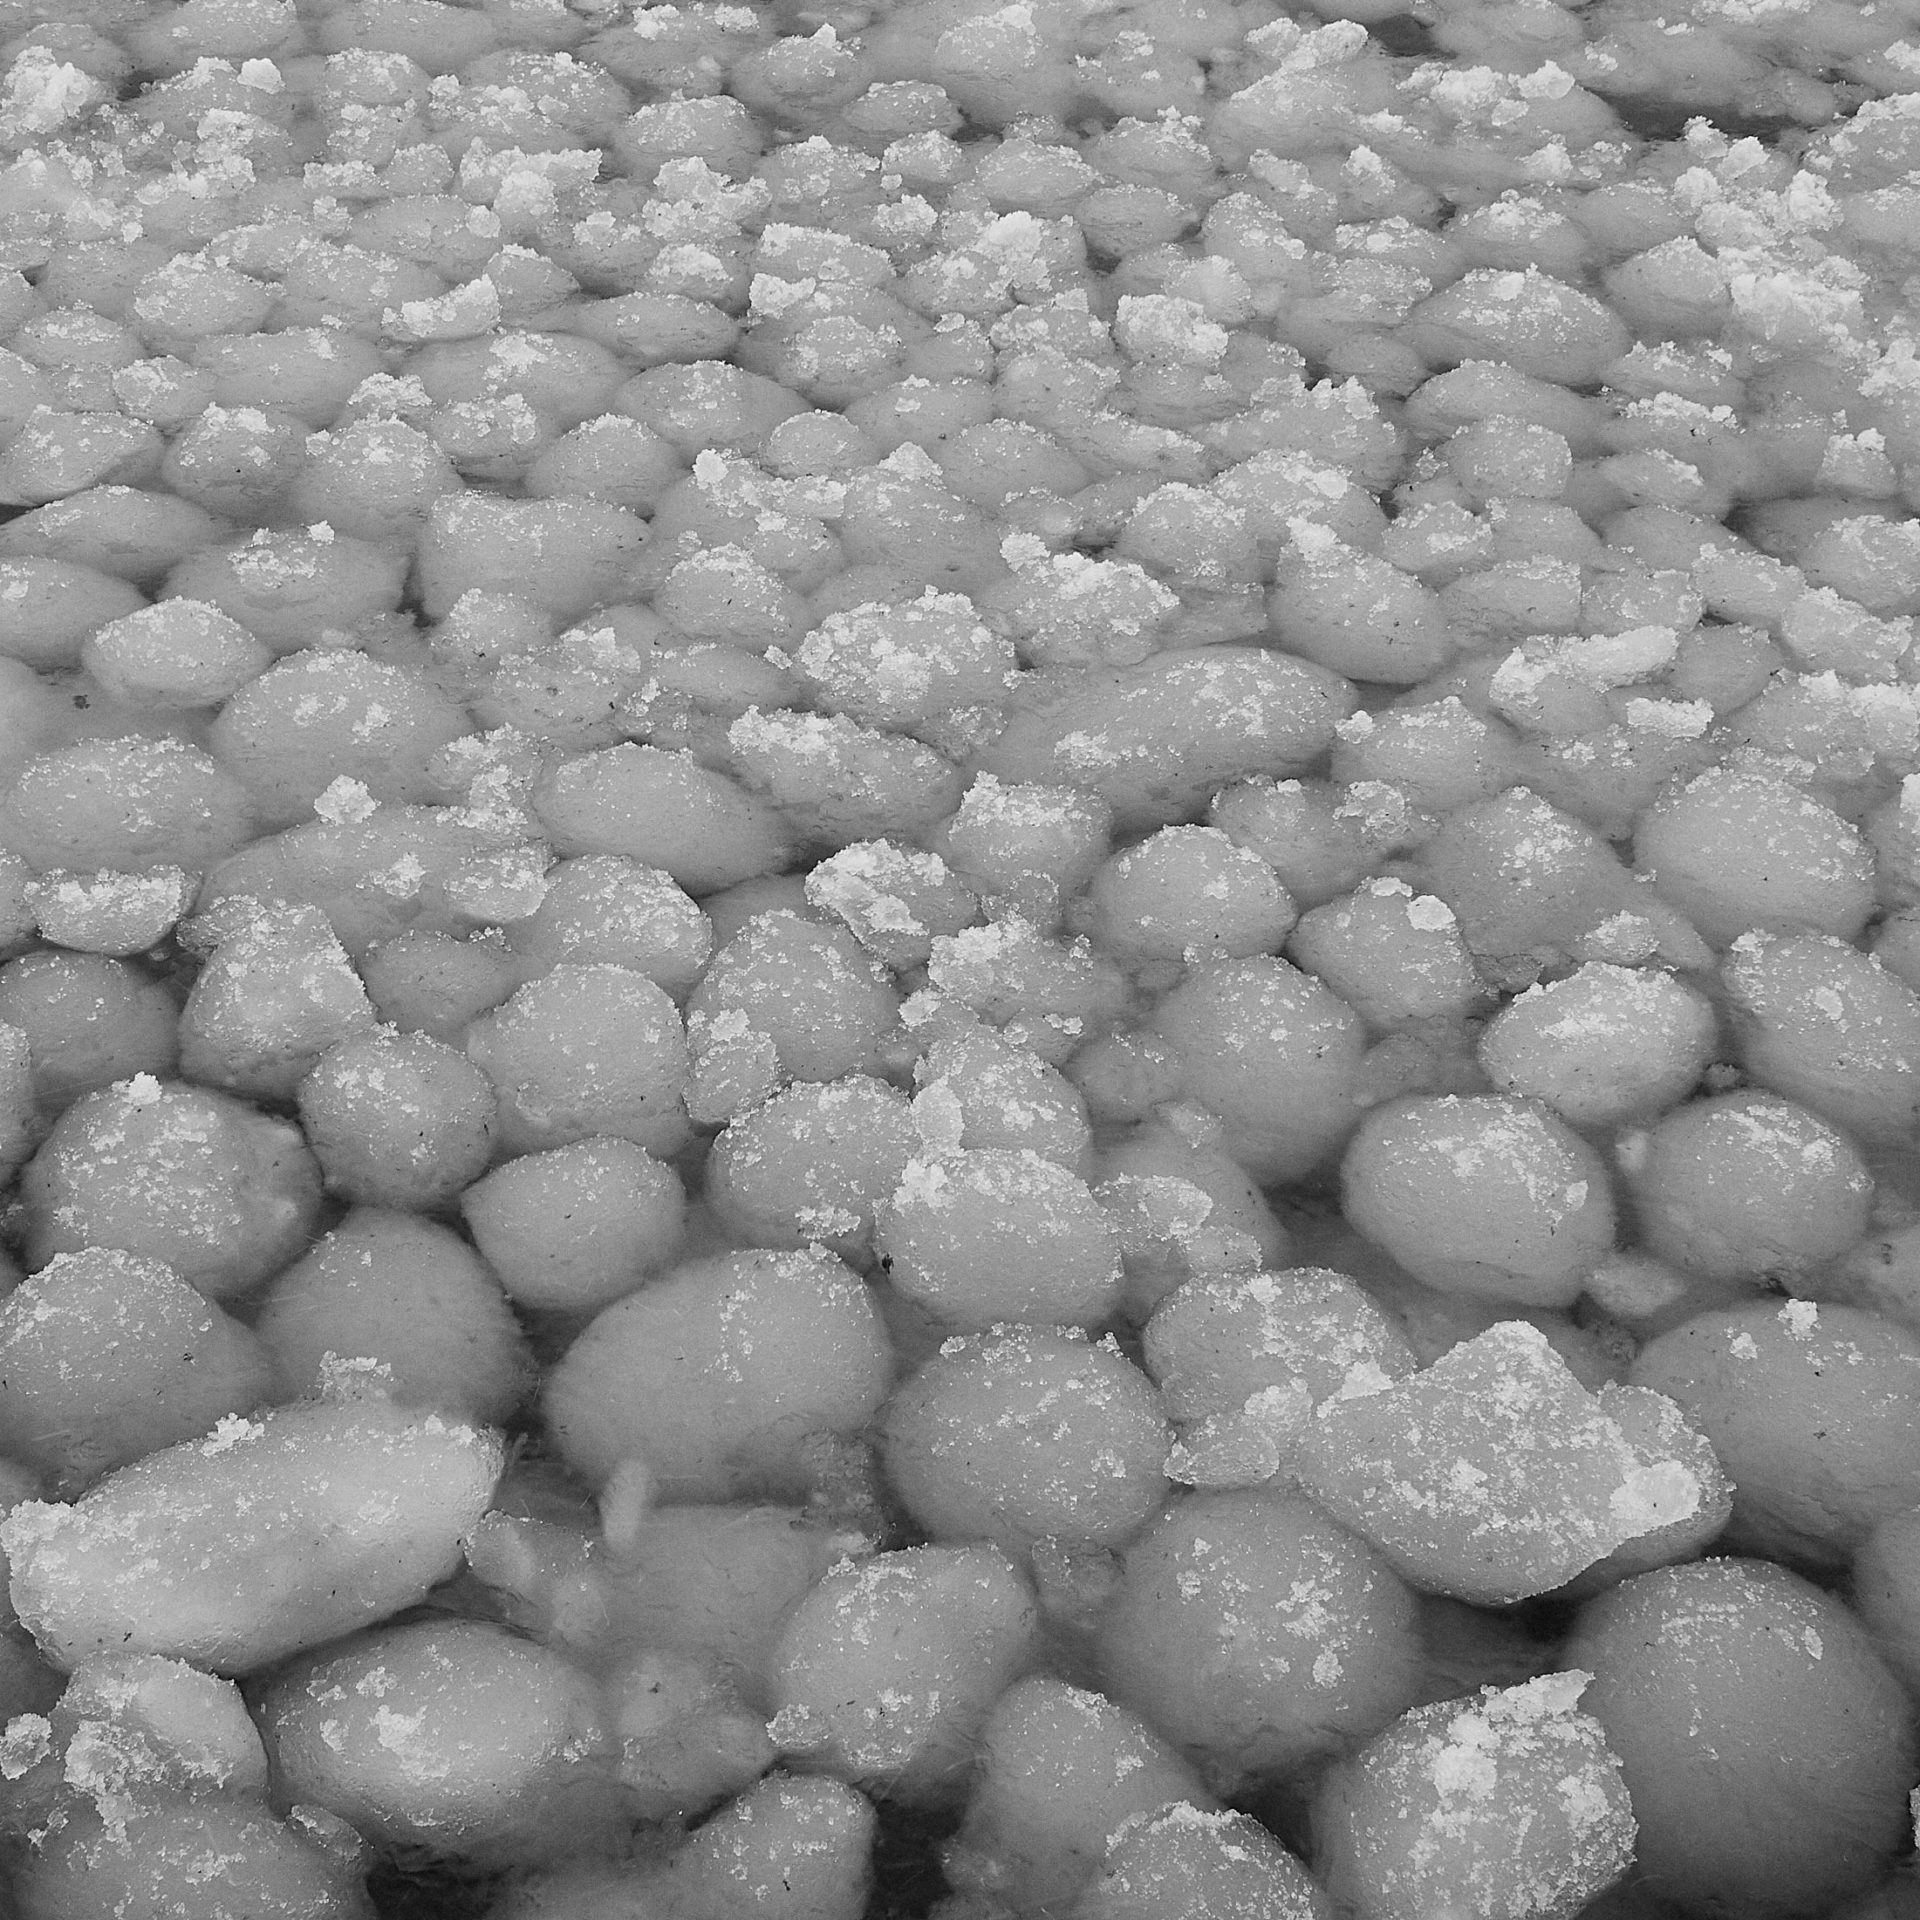 ice balls packed shore ice against ice caves at vans beach in Leland Michigan